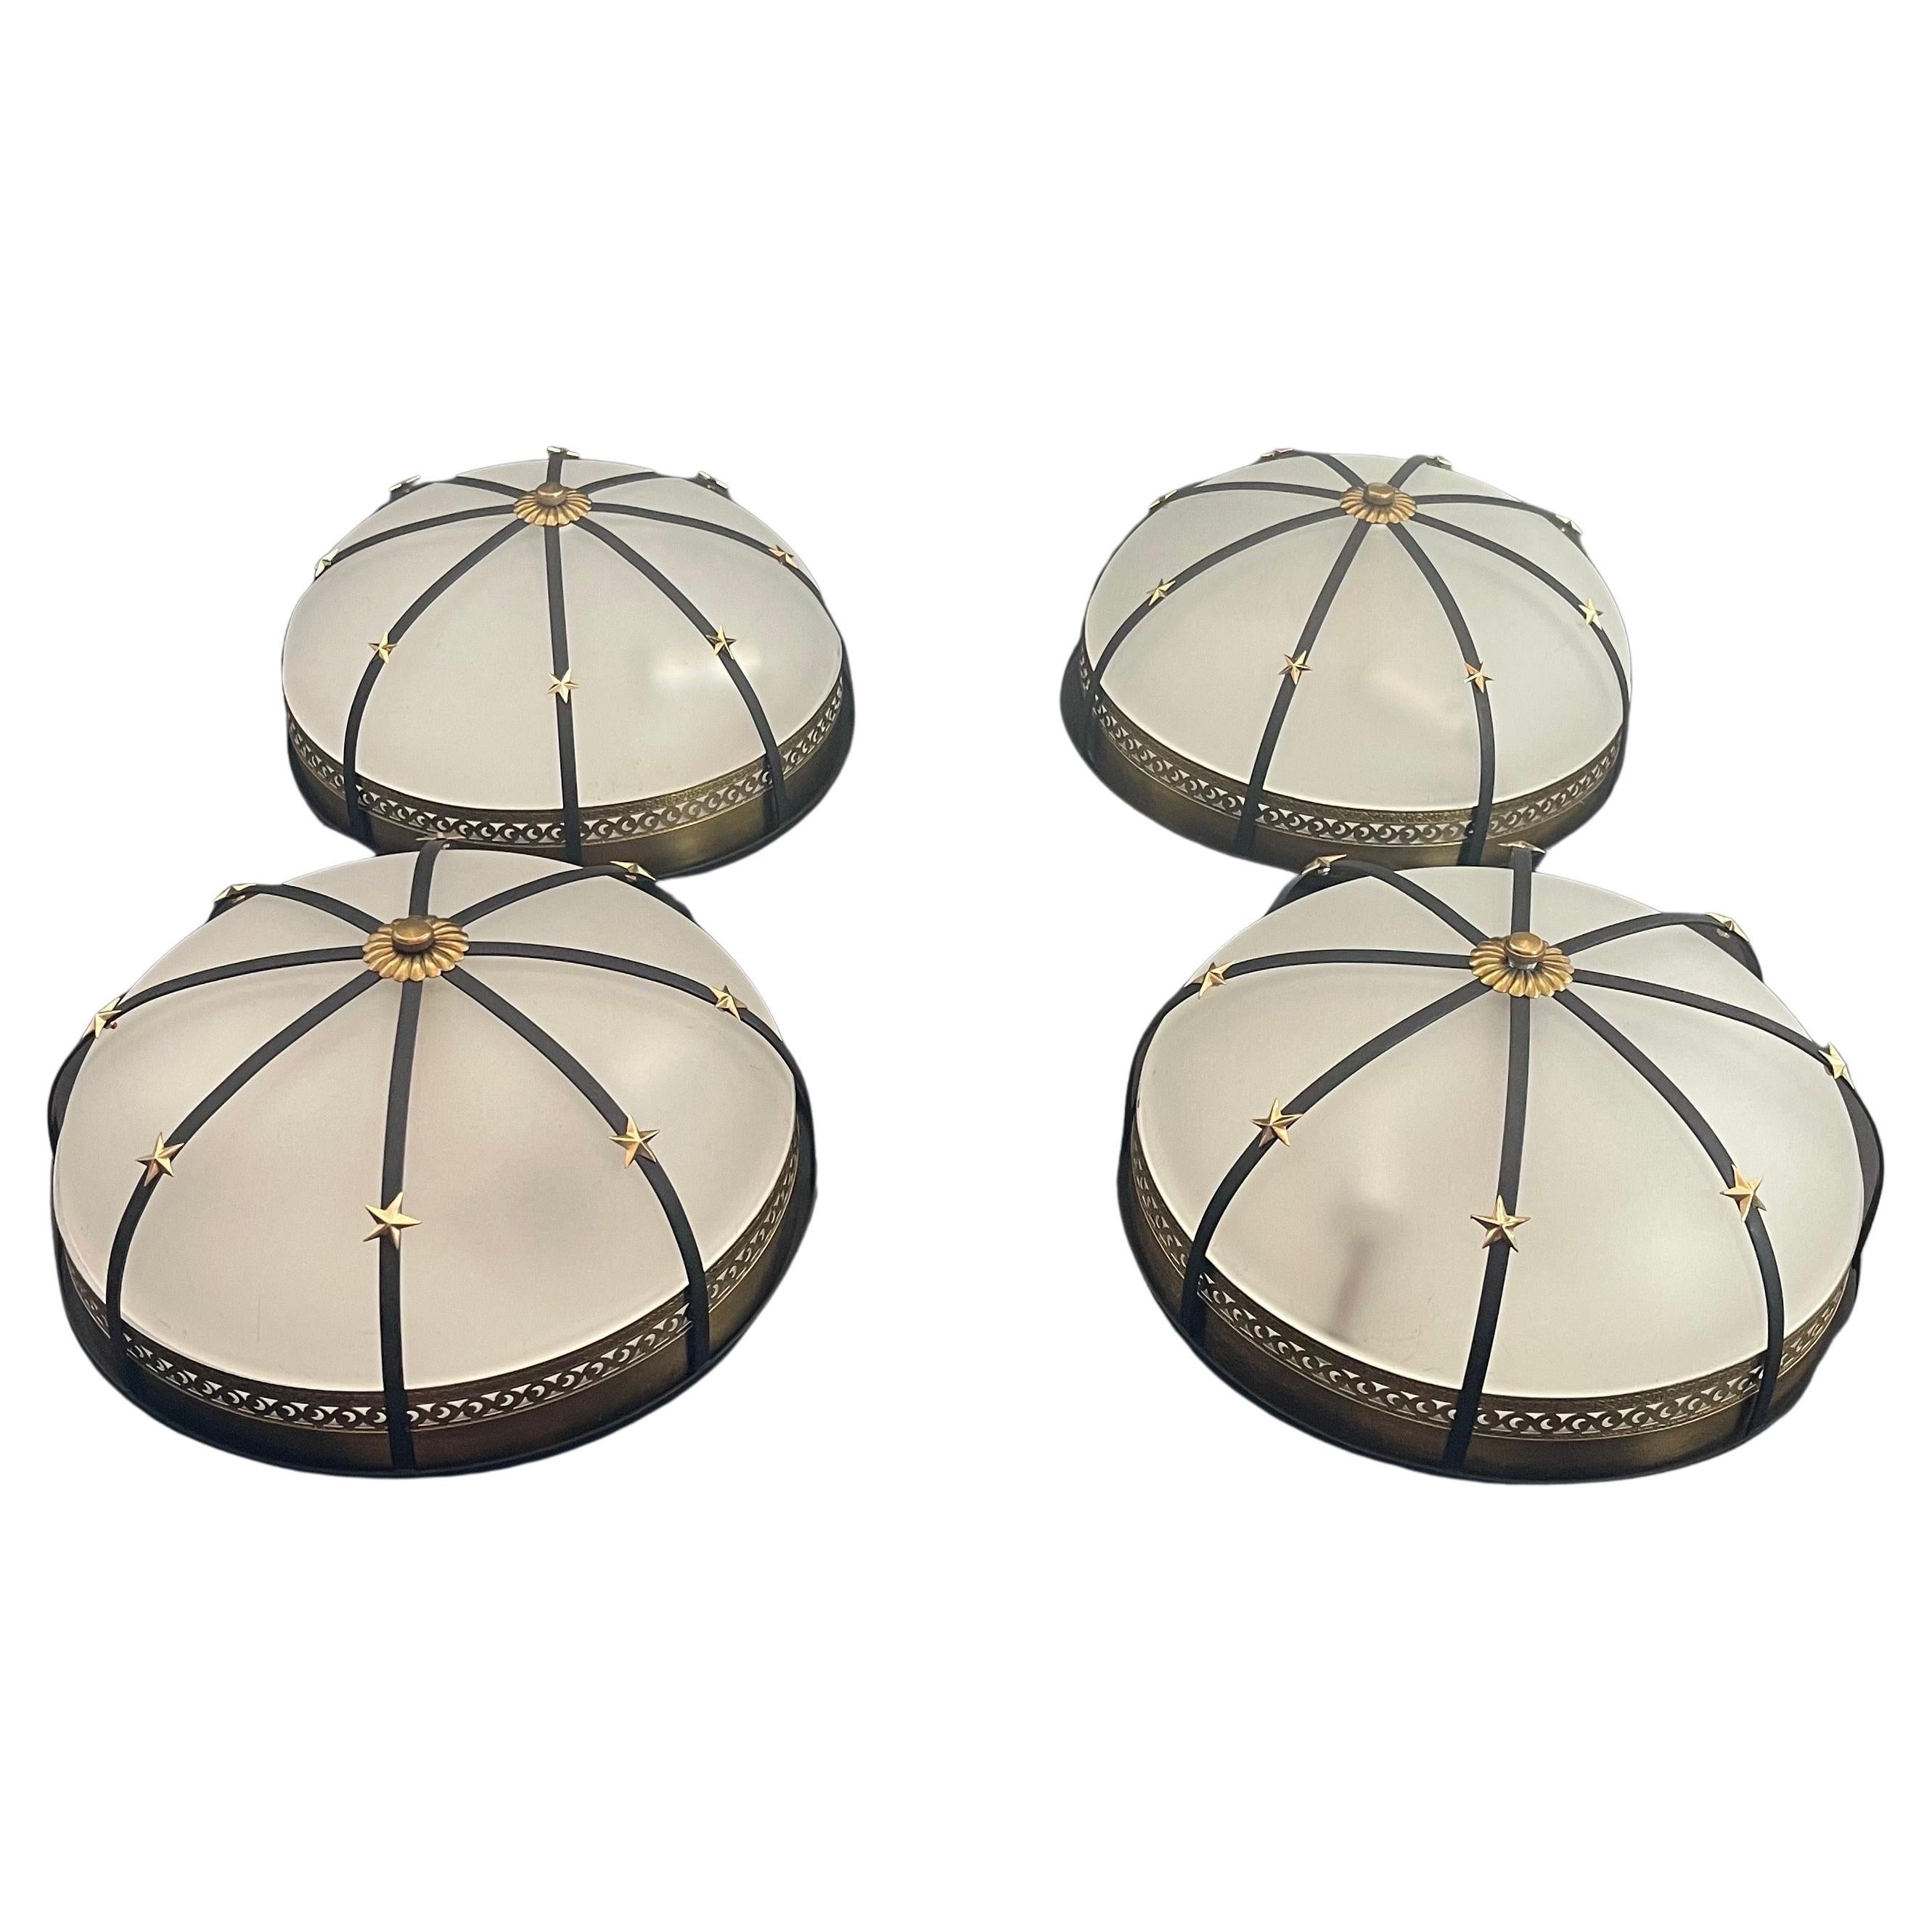 A Wonderful Set Of 4 Vintage Regency, Empire, Bronze Star Ormolu Rim Over A Frosted Glass Dome Flush Mount Fixtures Each With 2 candelabra lights Inside.

Each Fixture Sold Individually $1,450.00.